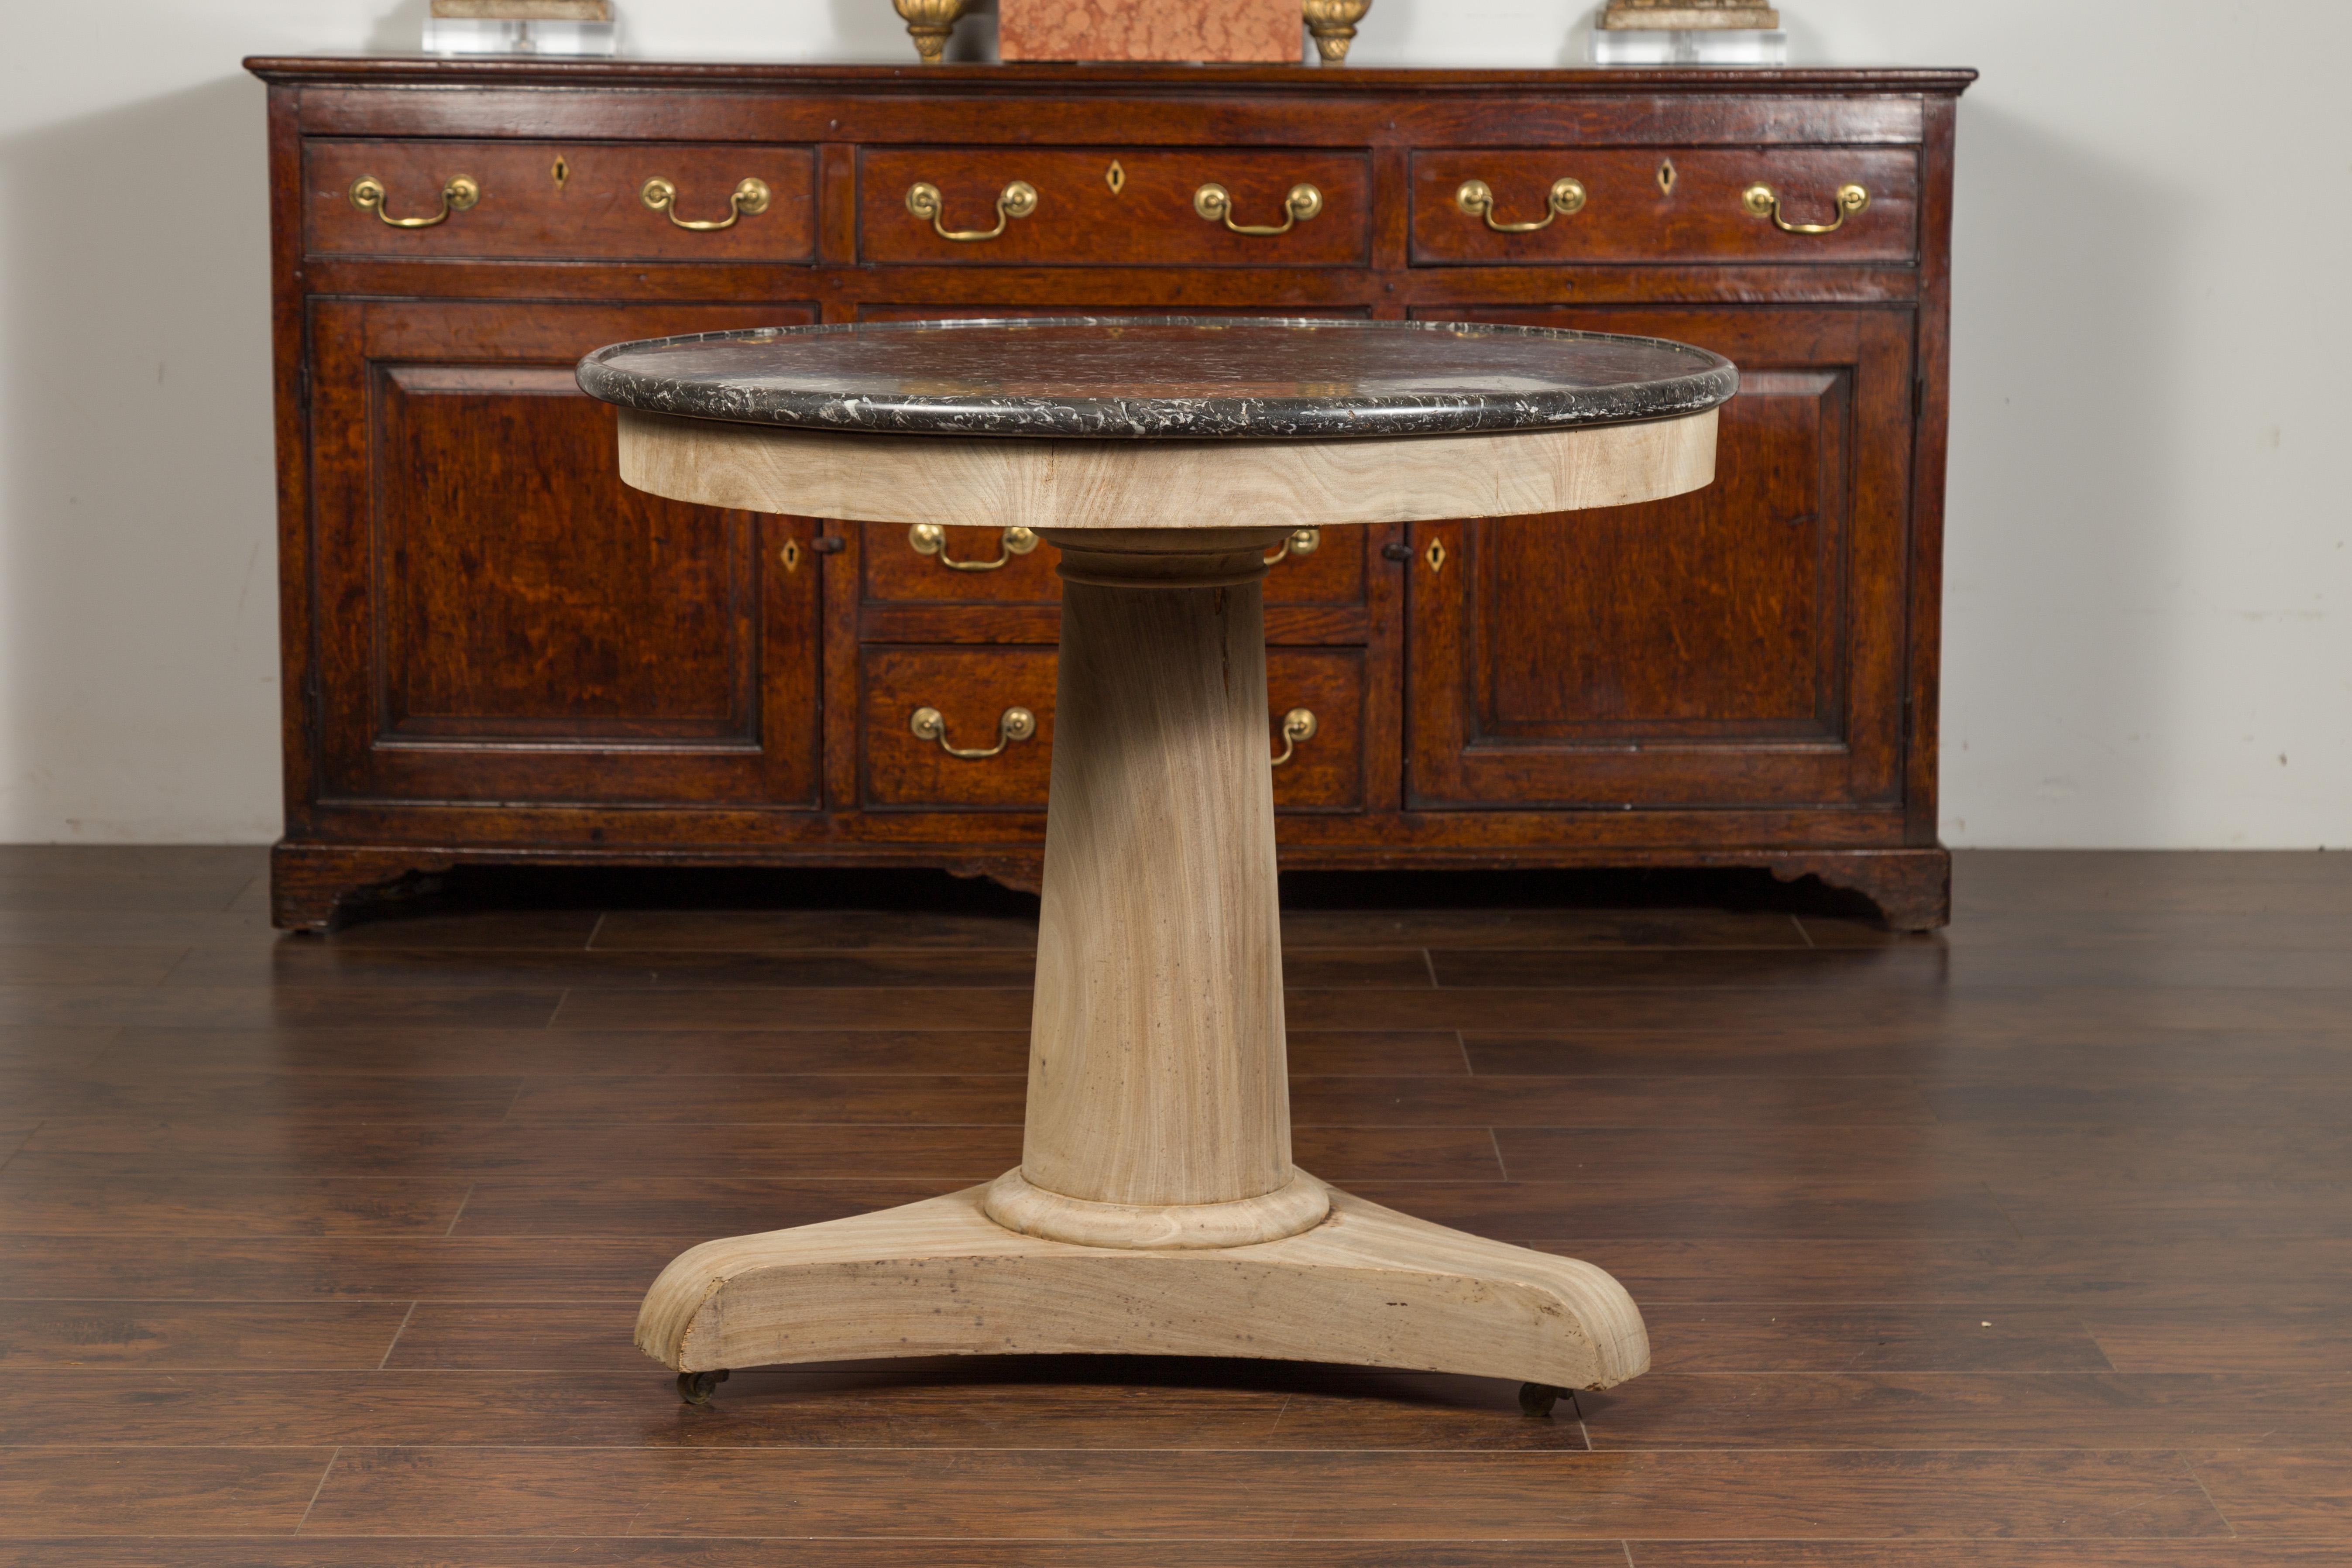 A French Empire style freshly bleached walnut side table from the 1870s, with dark grey variegated marble top and casters. Created in France at the end of Napoleon III's reign, this round pedestal side table presents the stylistic characteristics of